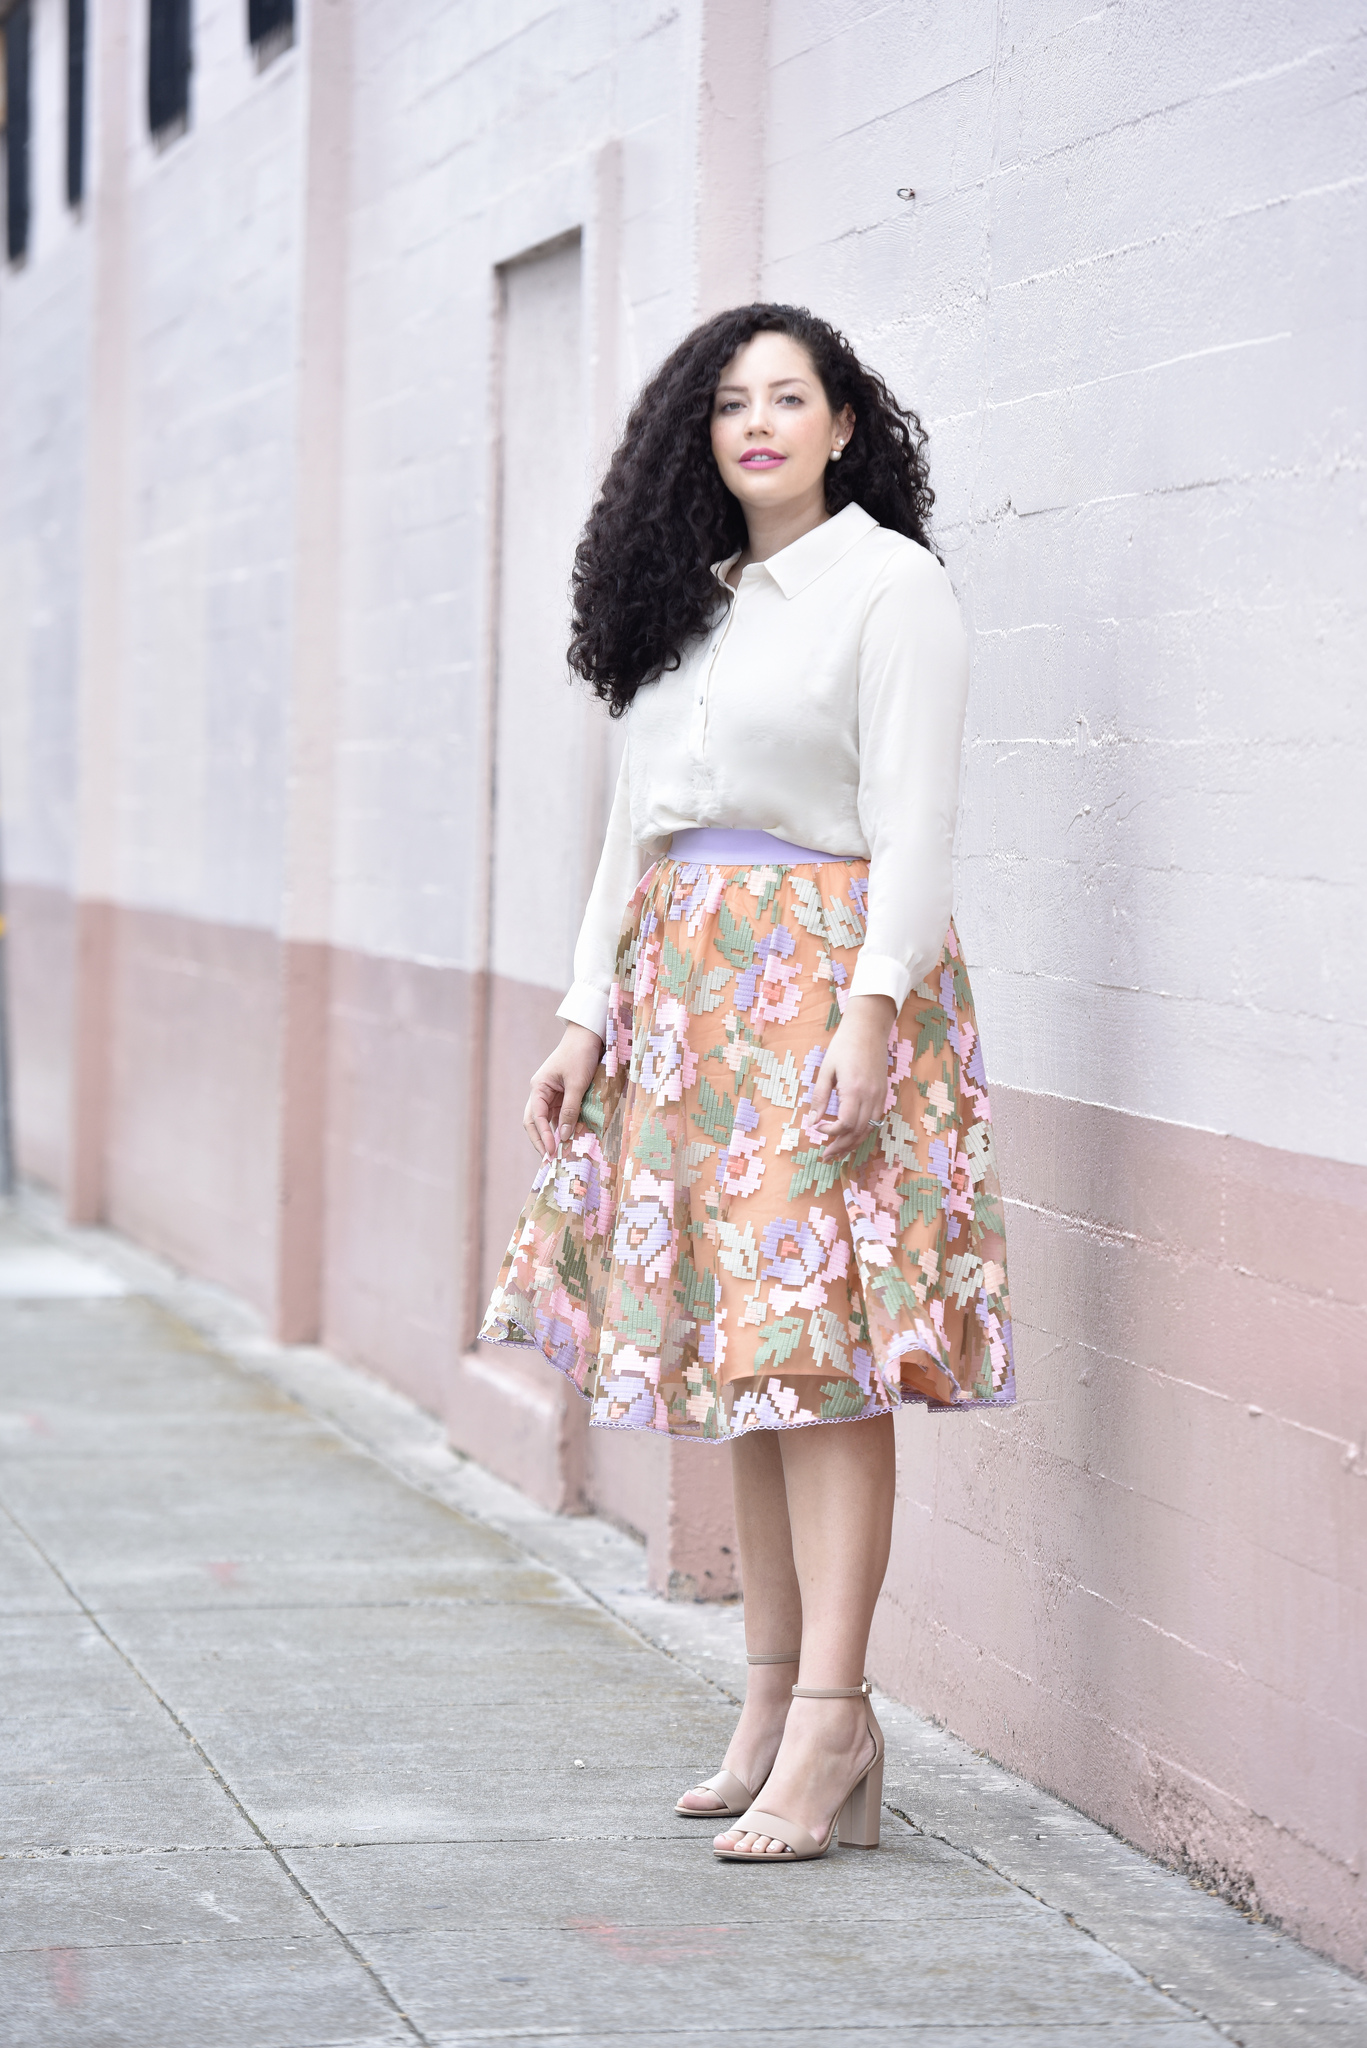 This Pastel Skirt Belongs In Your Spring Wardrobe Via @GirlWithCurves #outfits #blogger #plussize #anthropologie